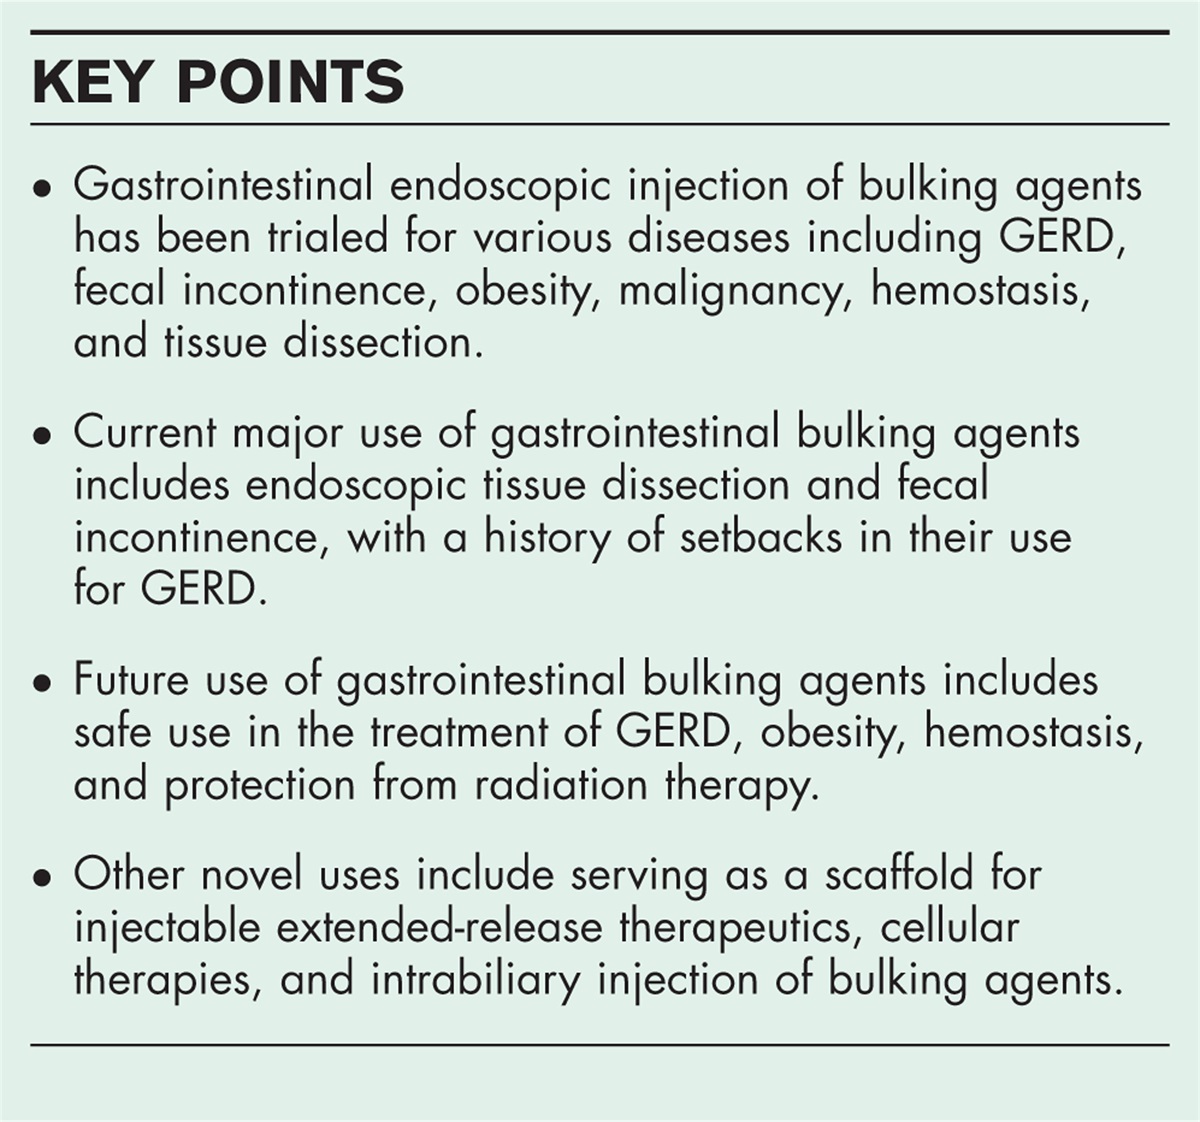 Bulking agents in gastrointestinal endoscopy: present applications and future advances